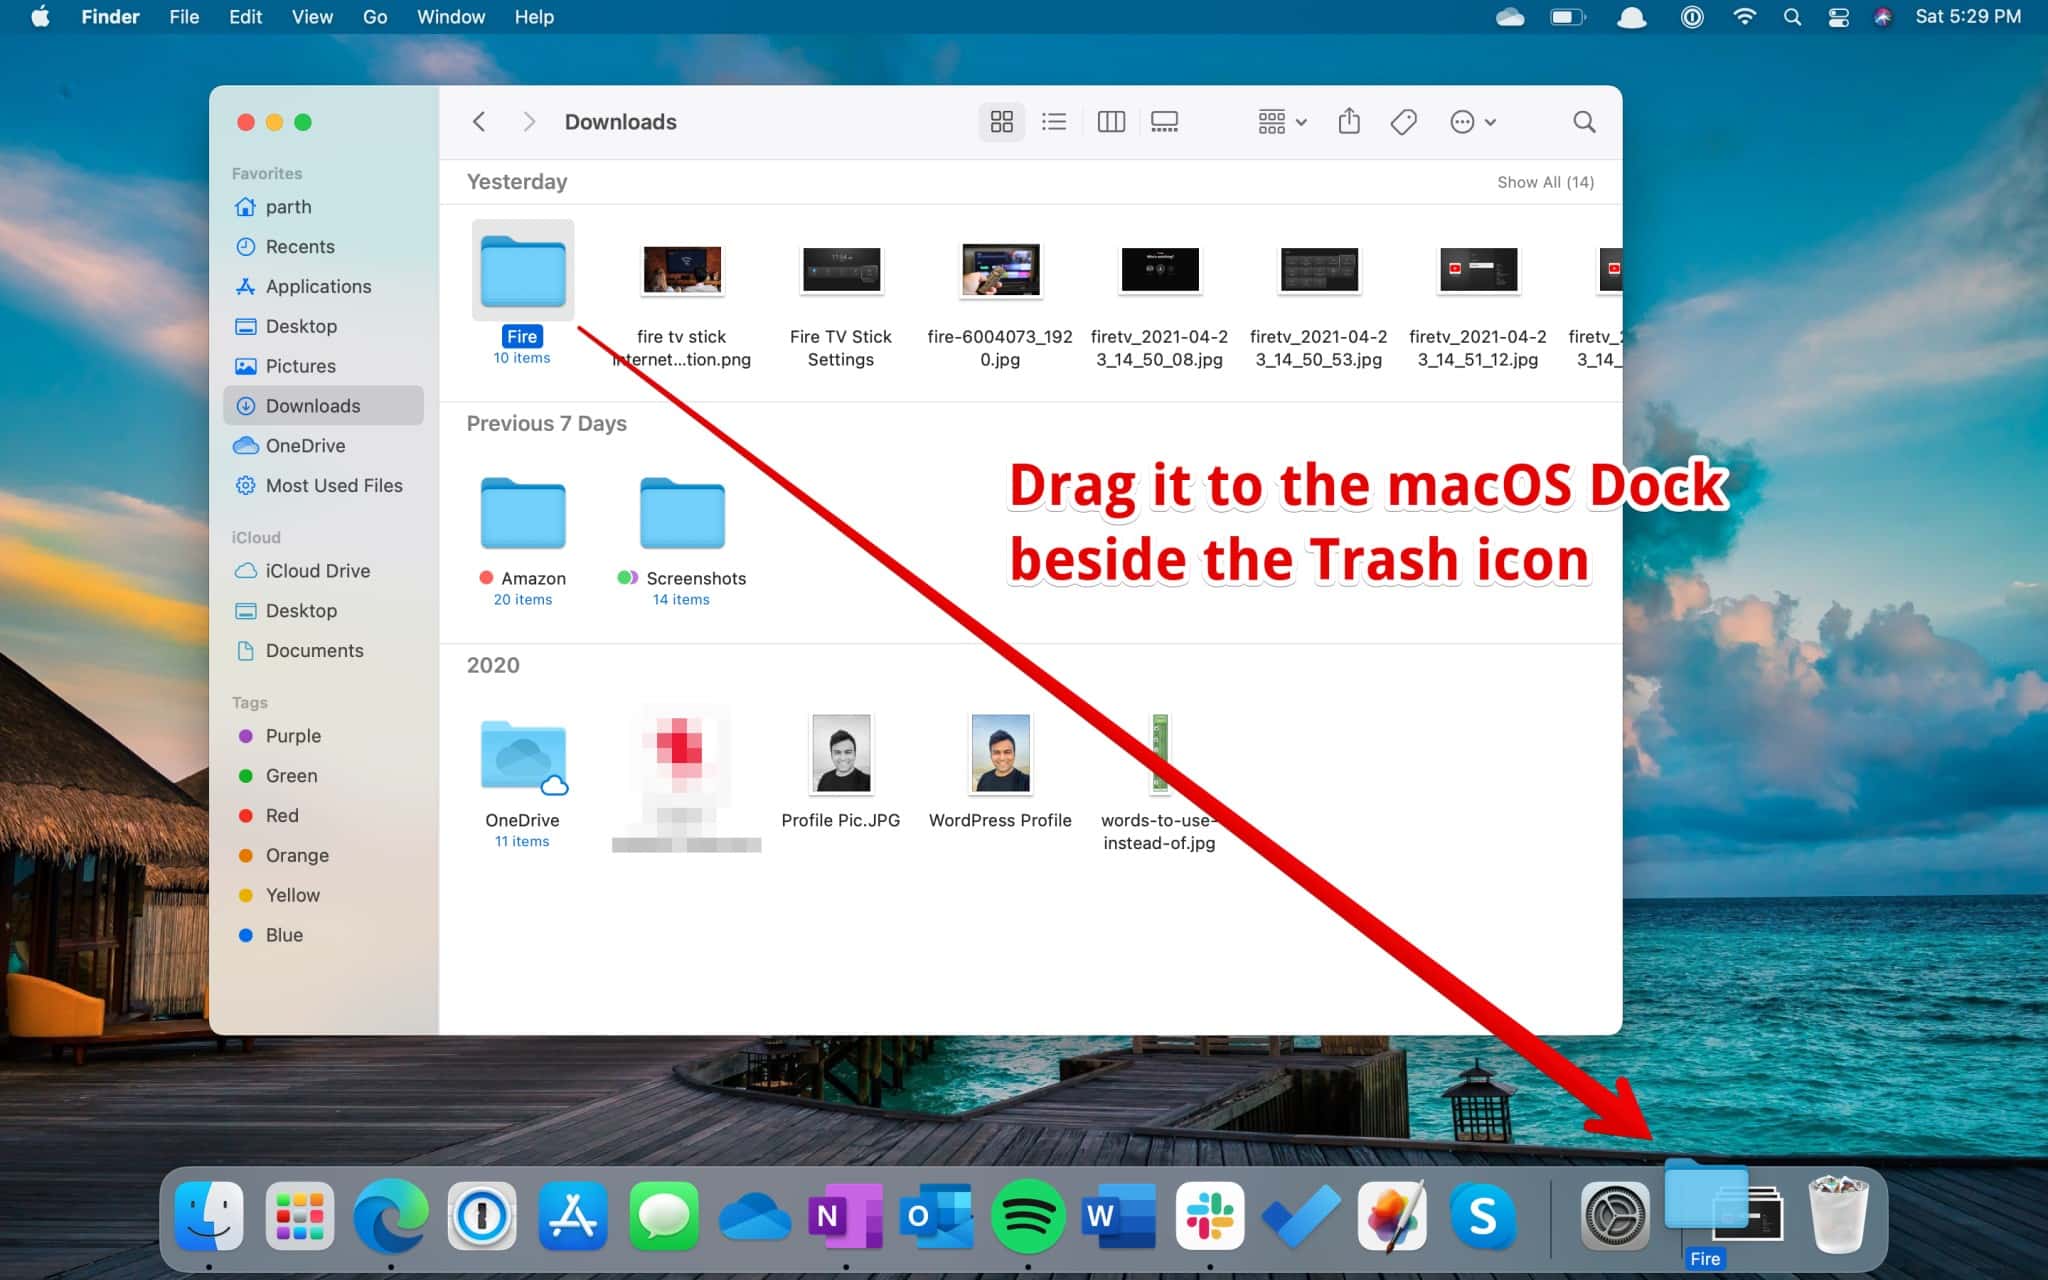 Drag it to the macOS Dock beside the Trash icon